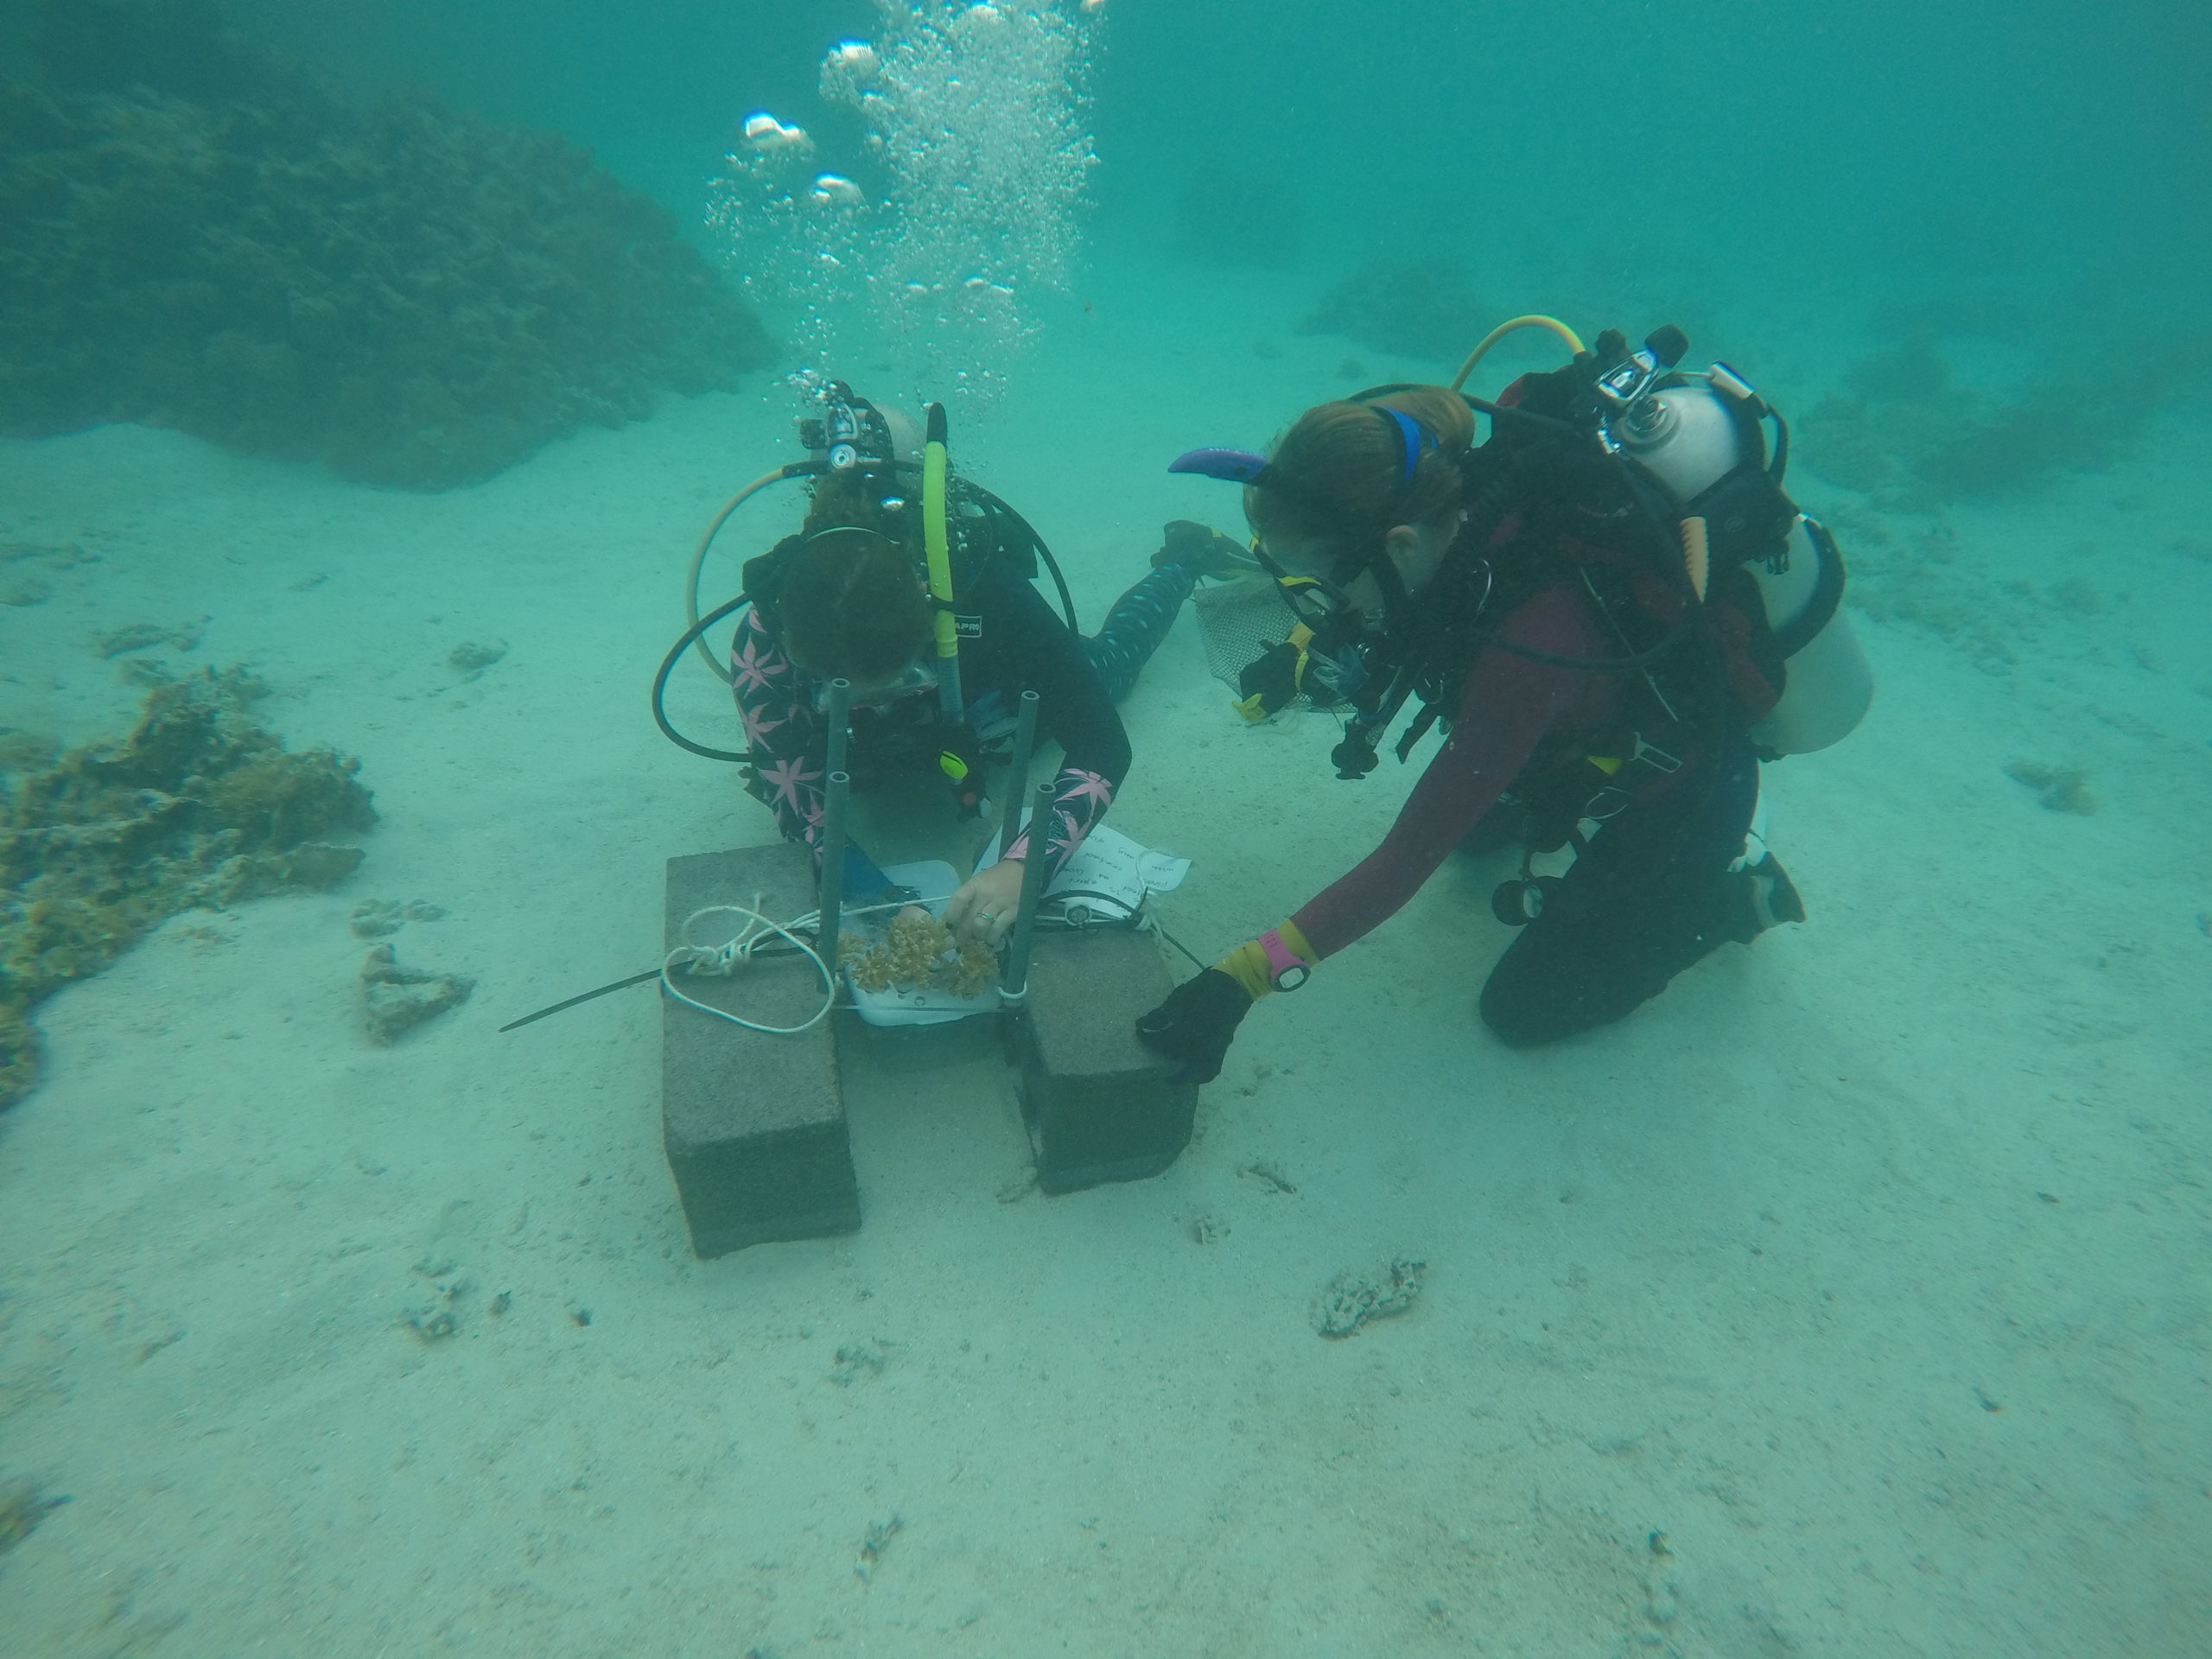 two divers examine a coral formation